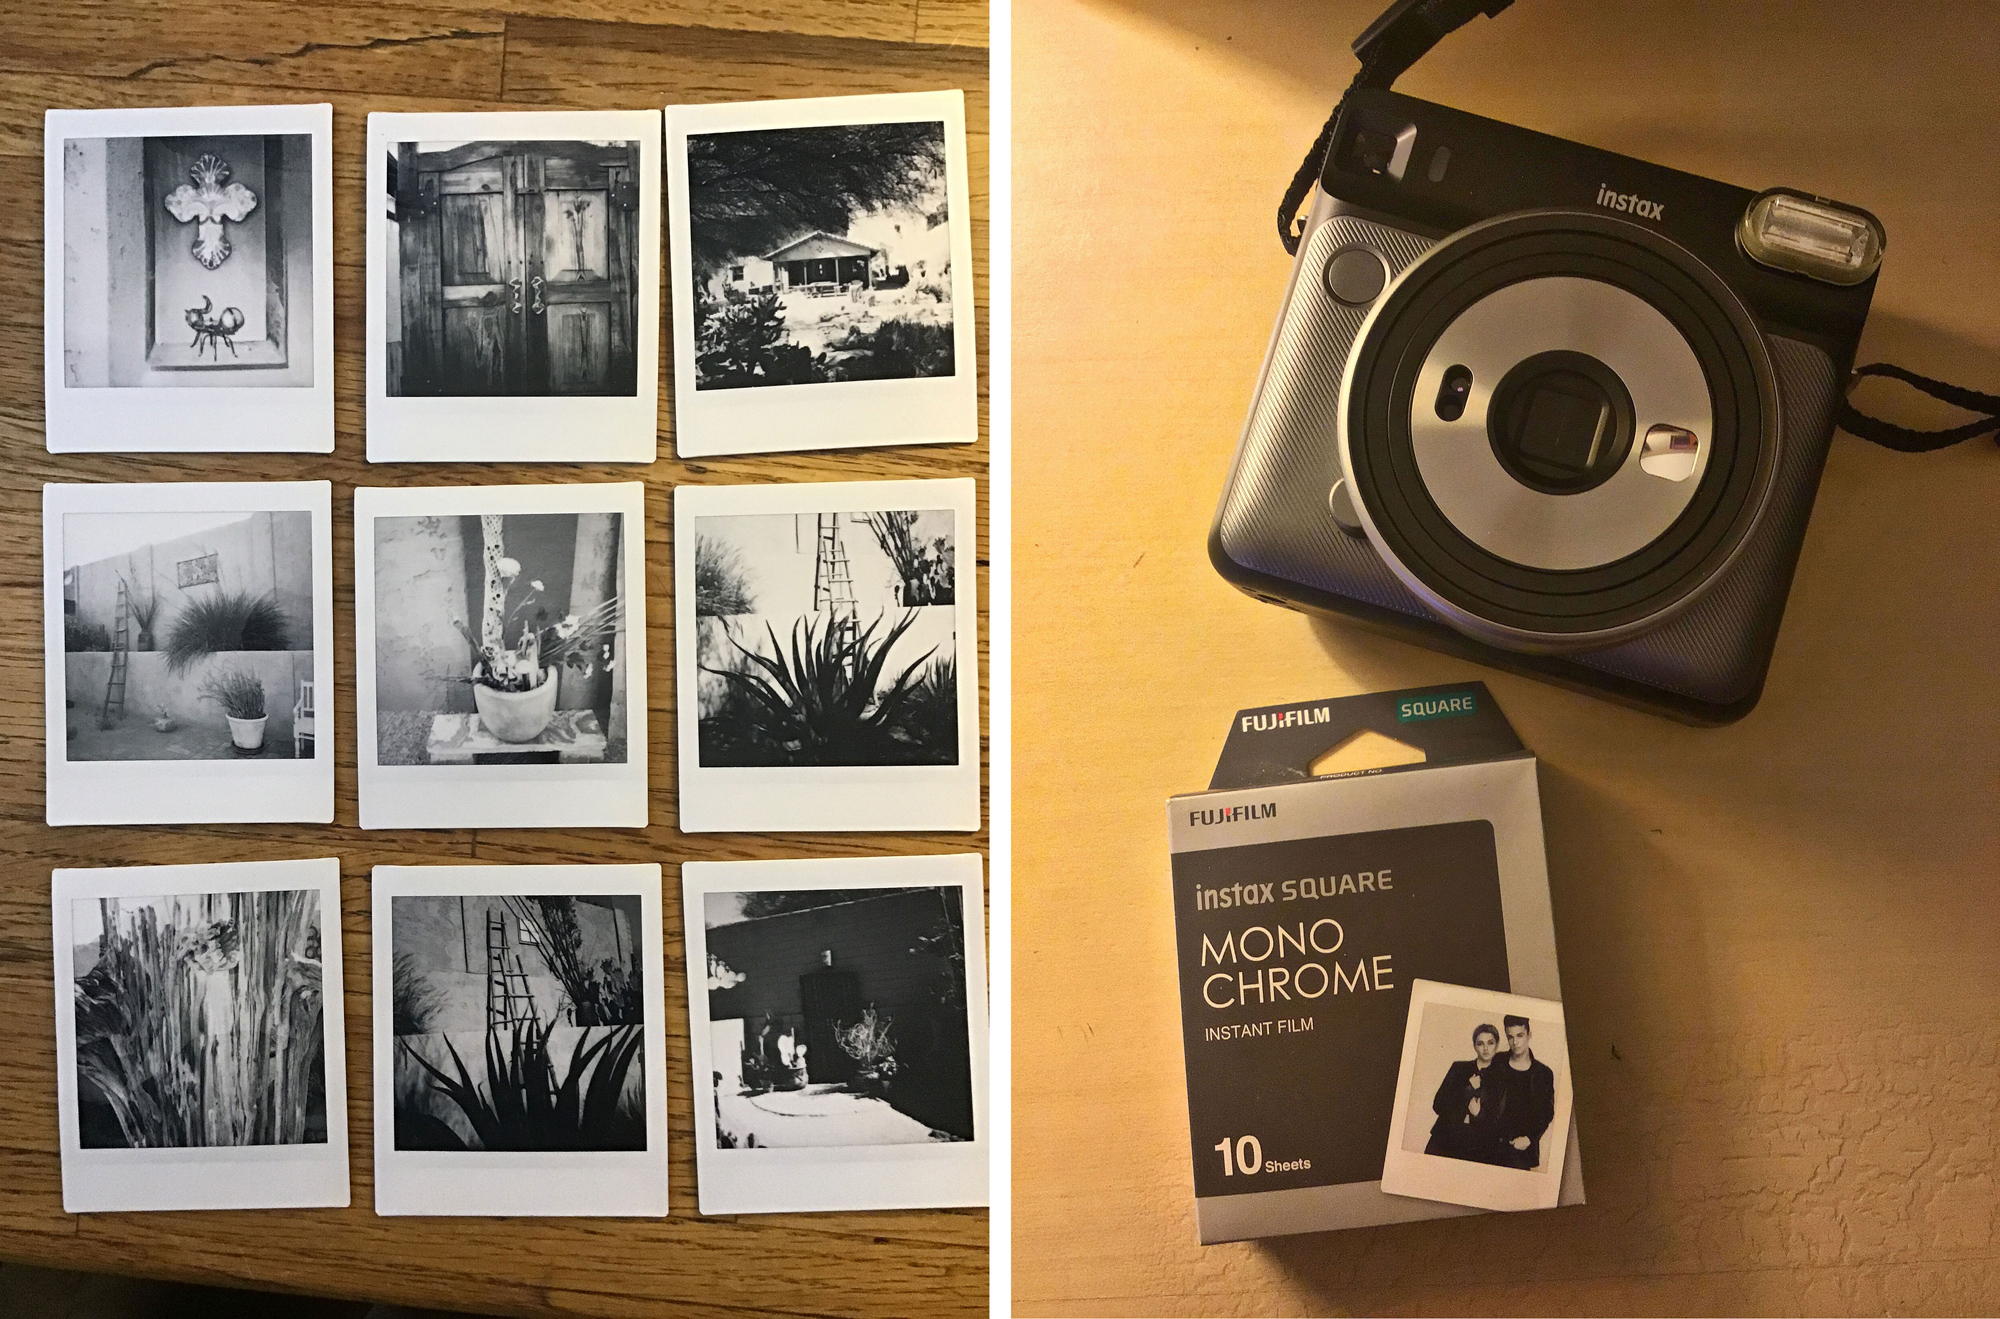 The Fuji Instax photographs I created and the Fuji Instax Square and Mono Chrome film together with  A contemporary look but not quite the cachet of the SX 70